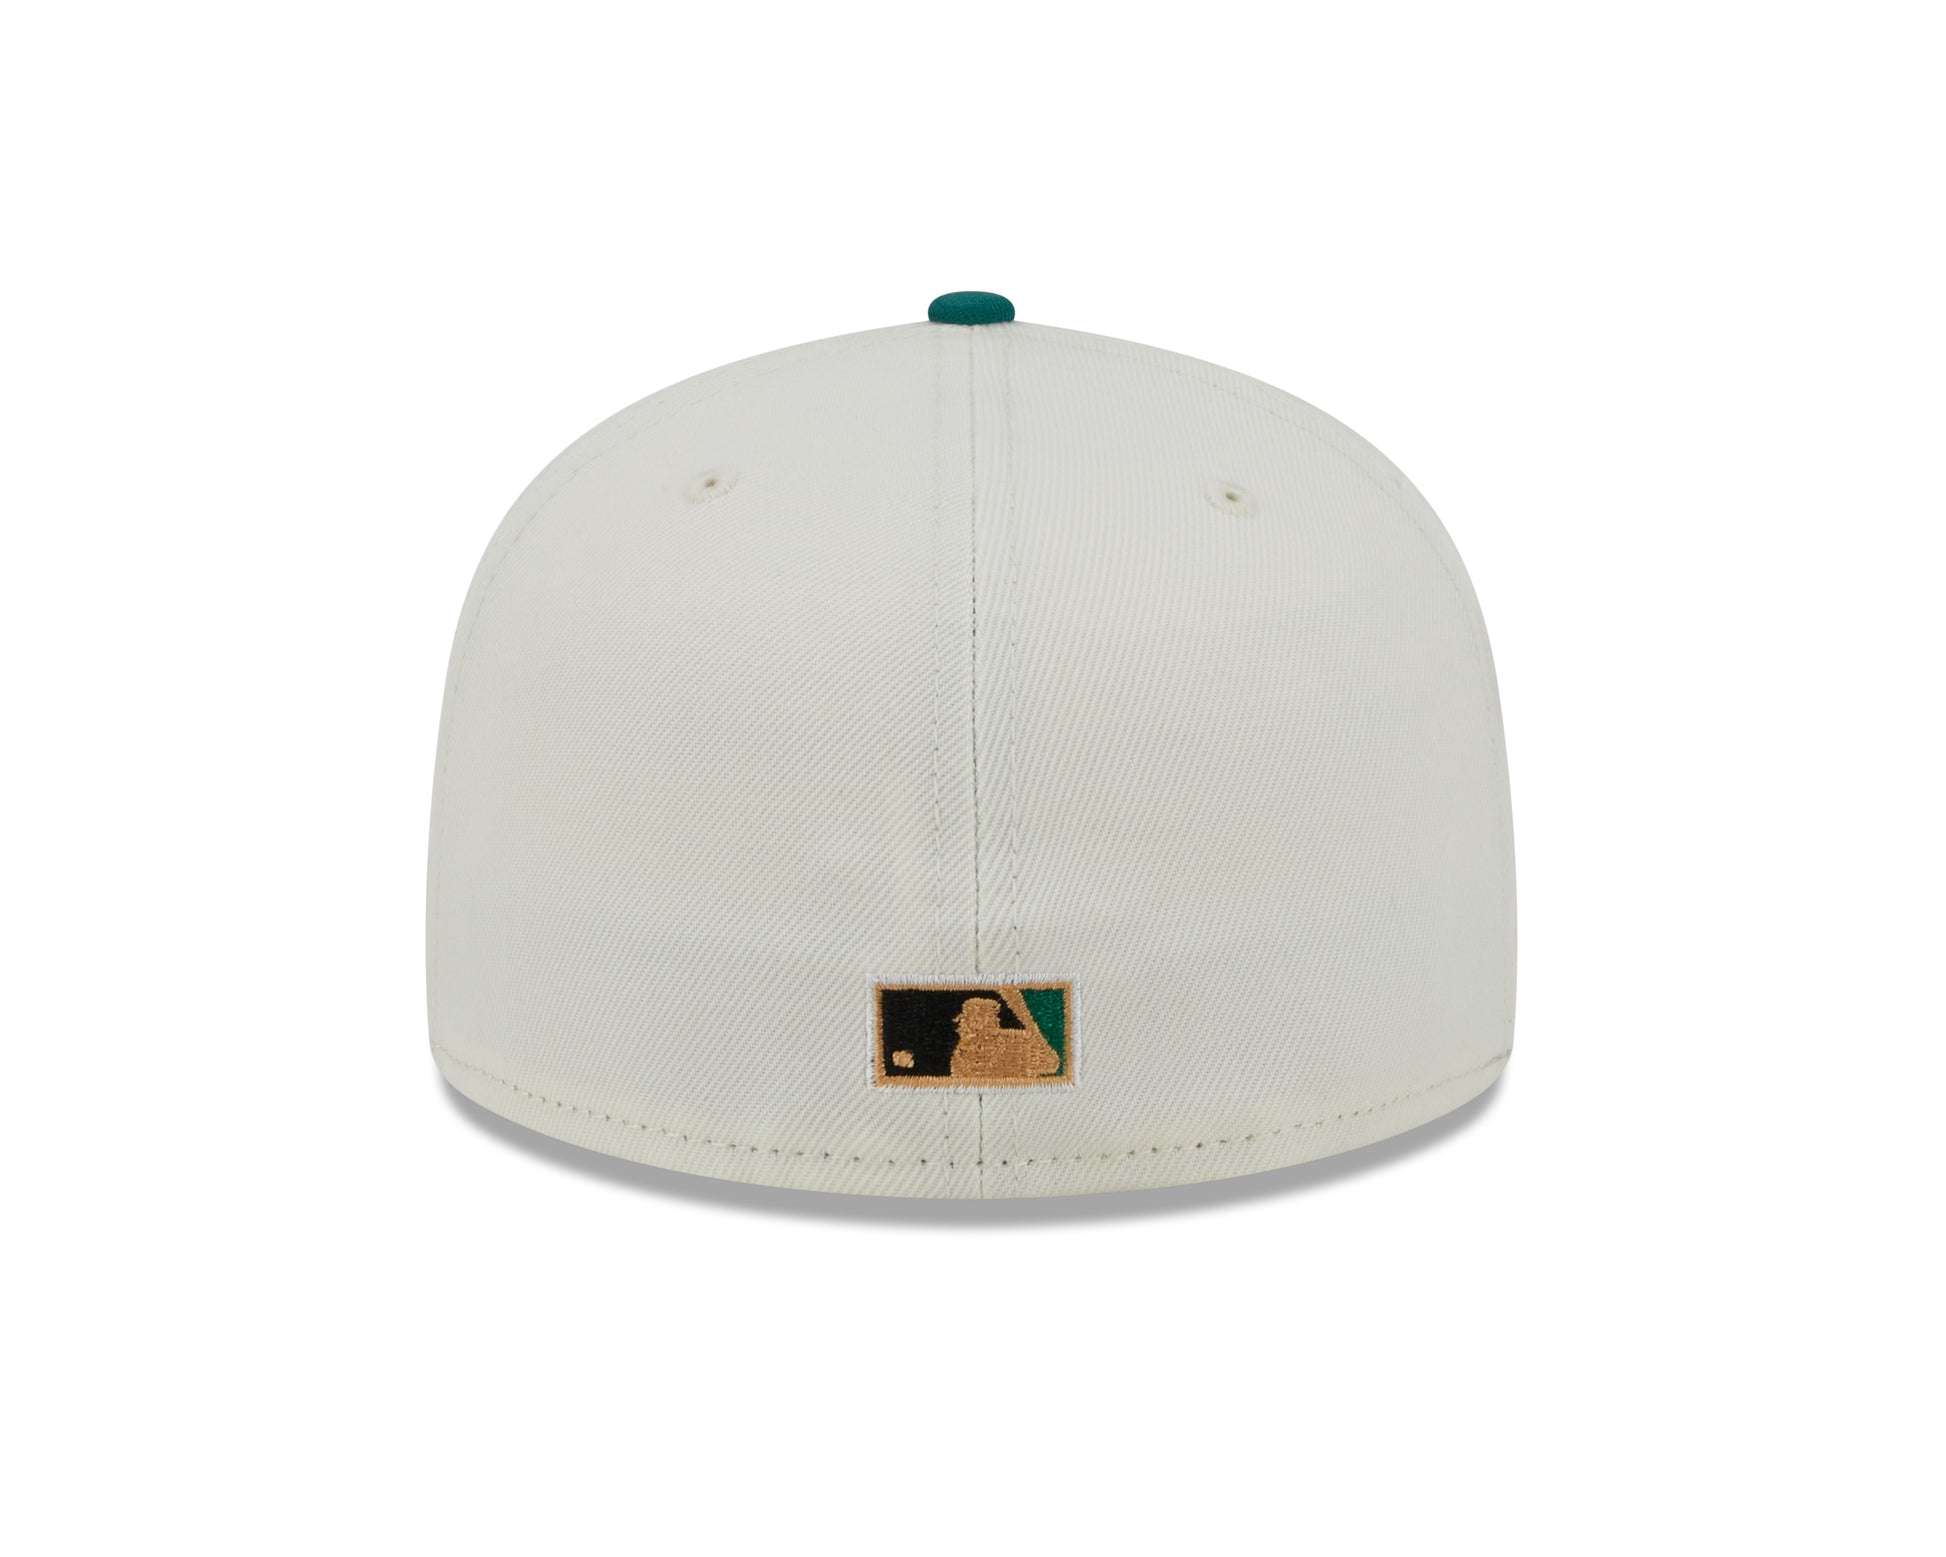 New Era 59Fifty Fitted Cap CAMP Houston Astros 50th - White/Green - Headz Up 